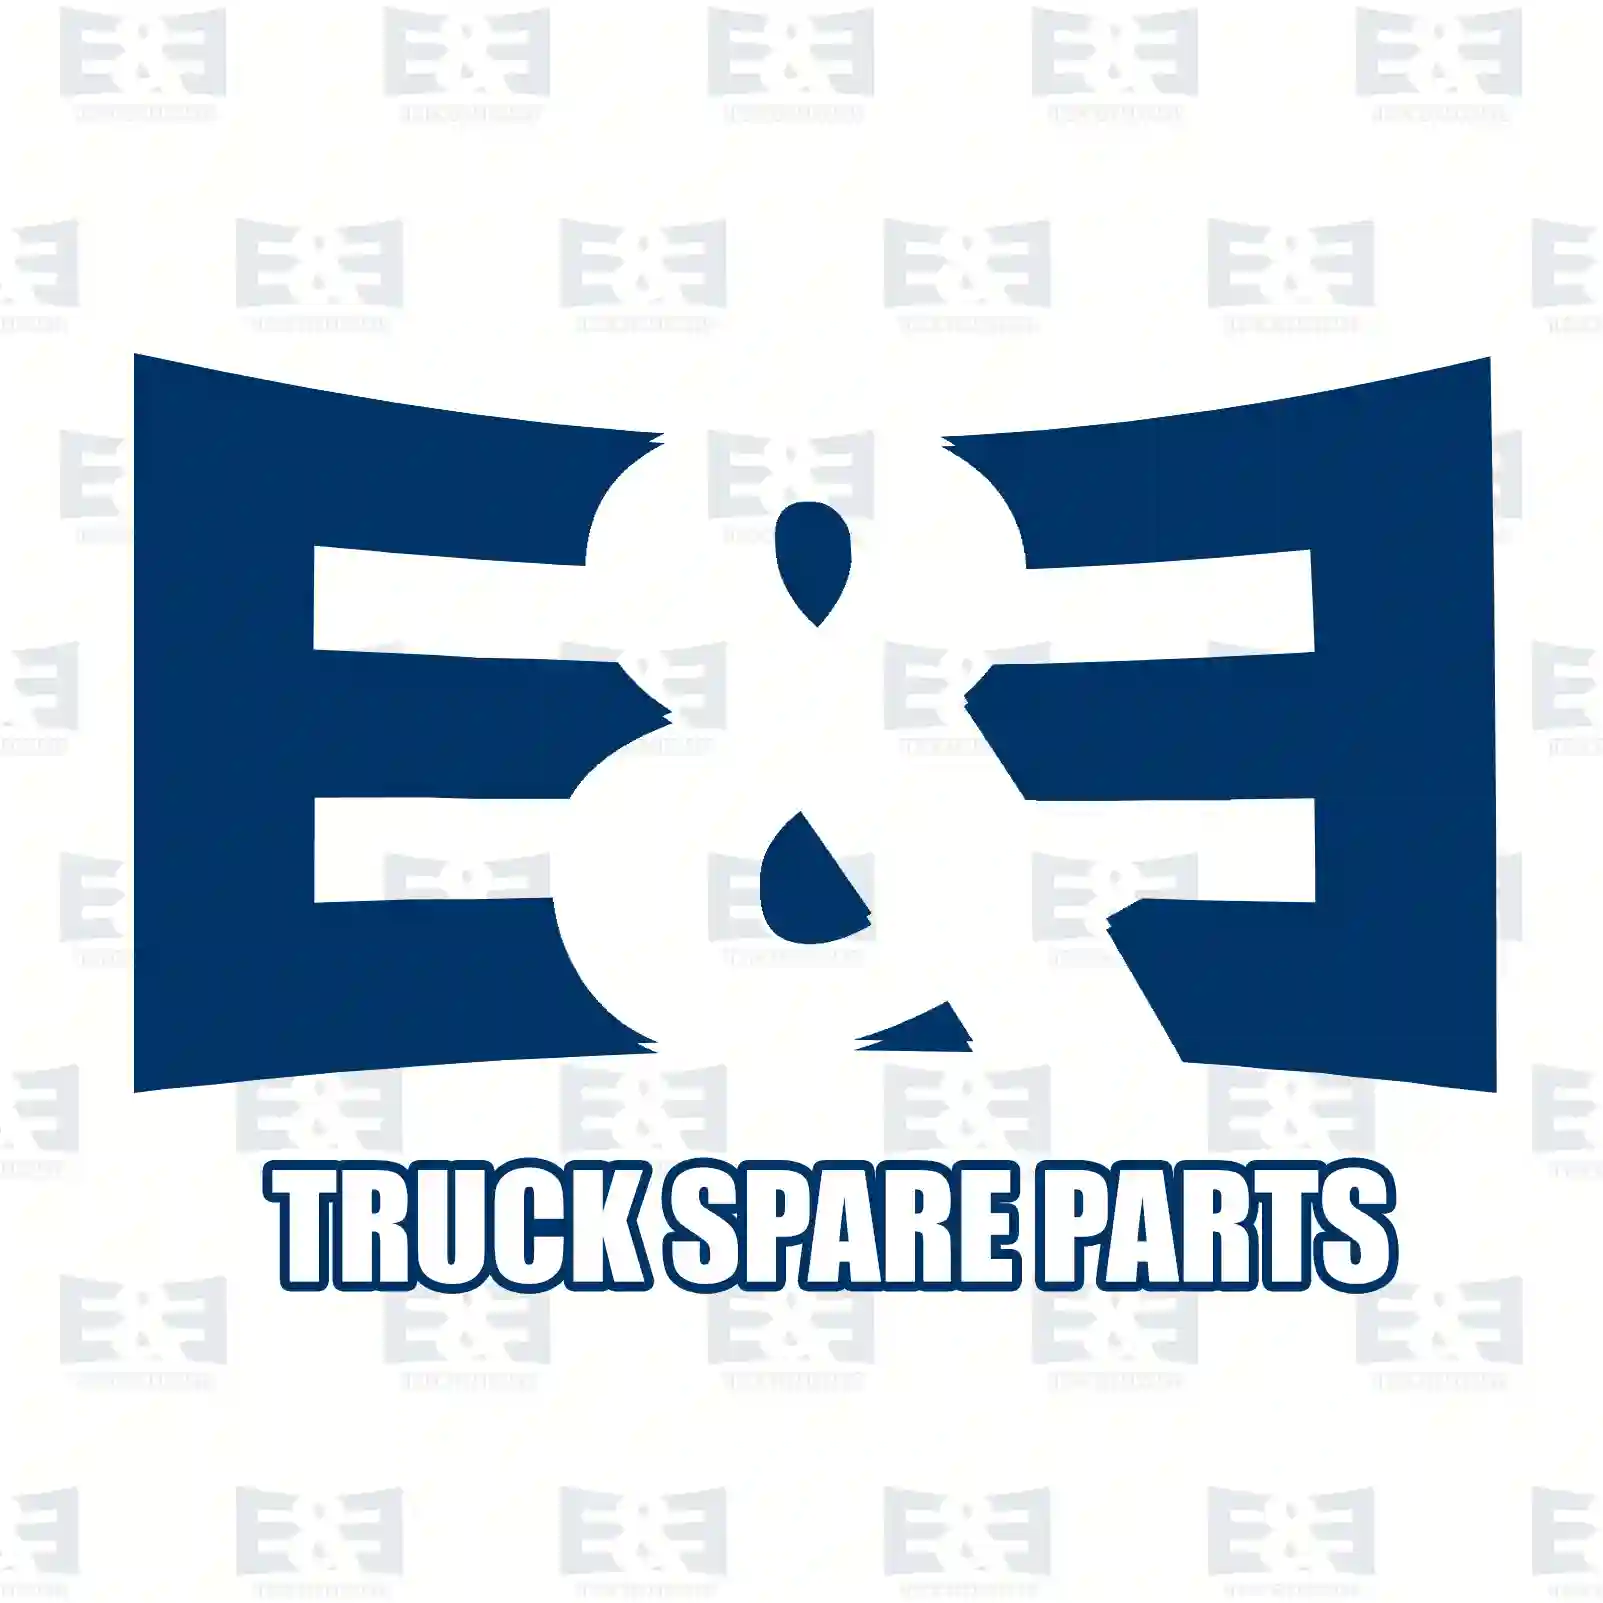  Rocker switch, traction control system || E&E Truck Spare Parts | Truck Spare Parts, Auotomotive Spare Parts